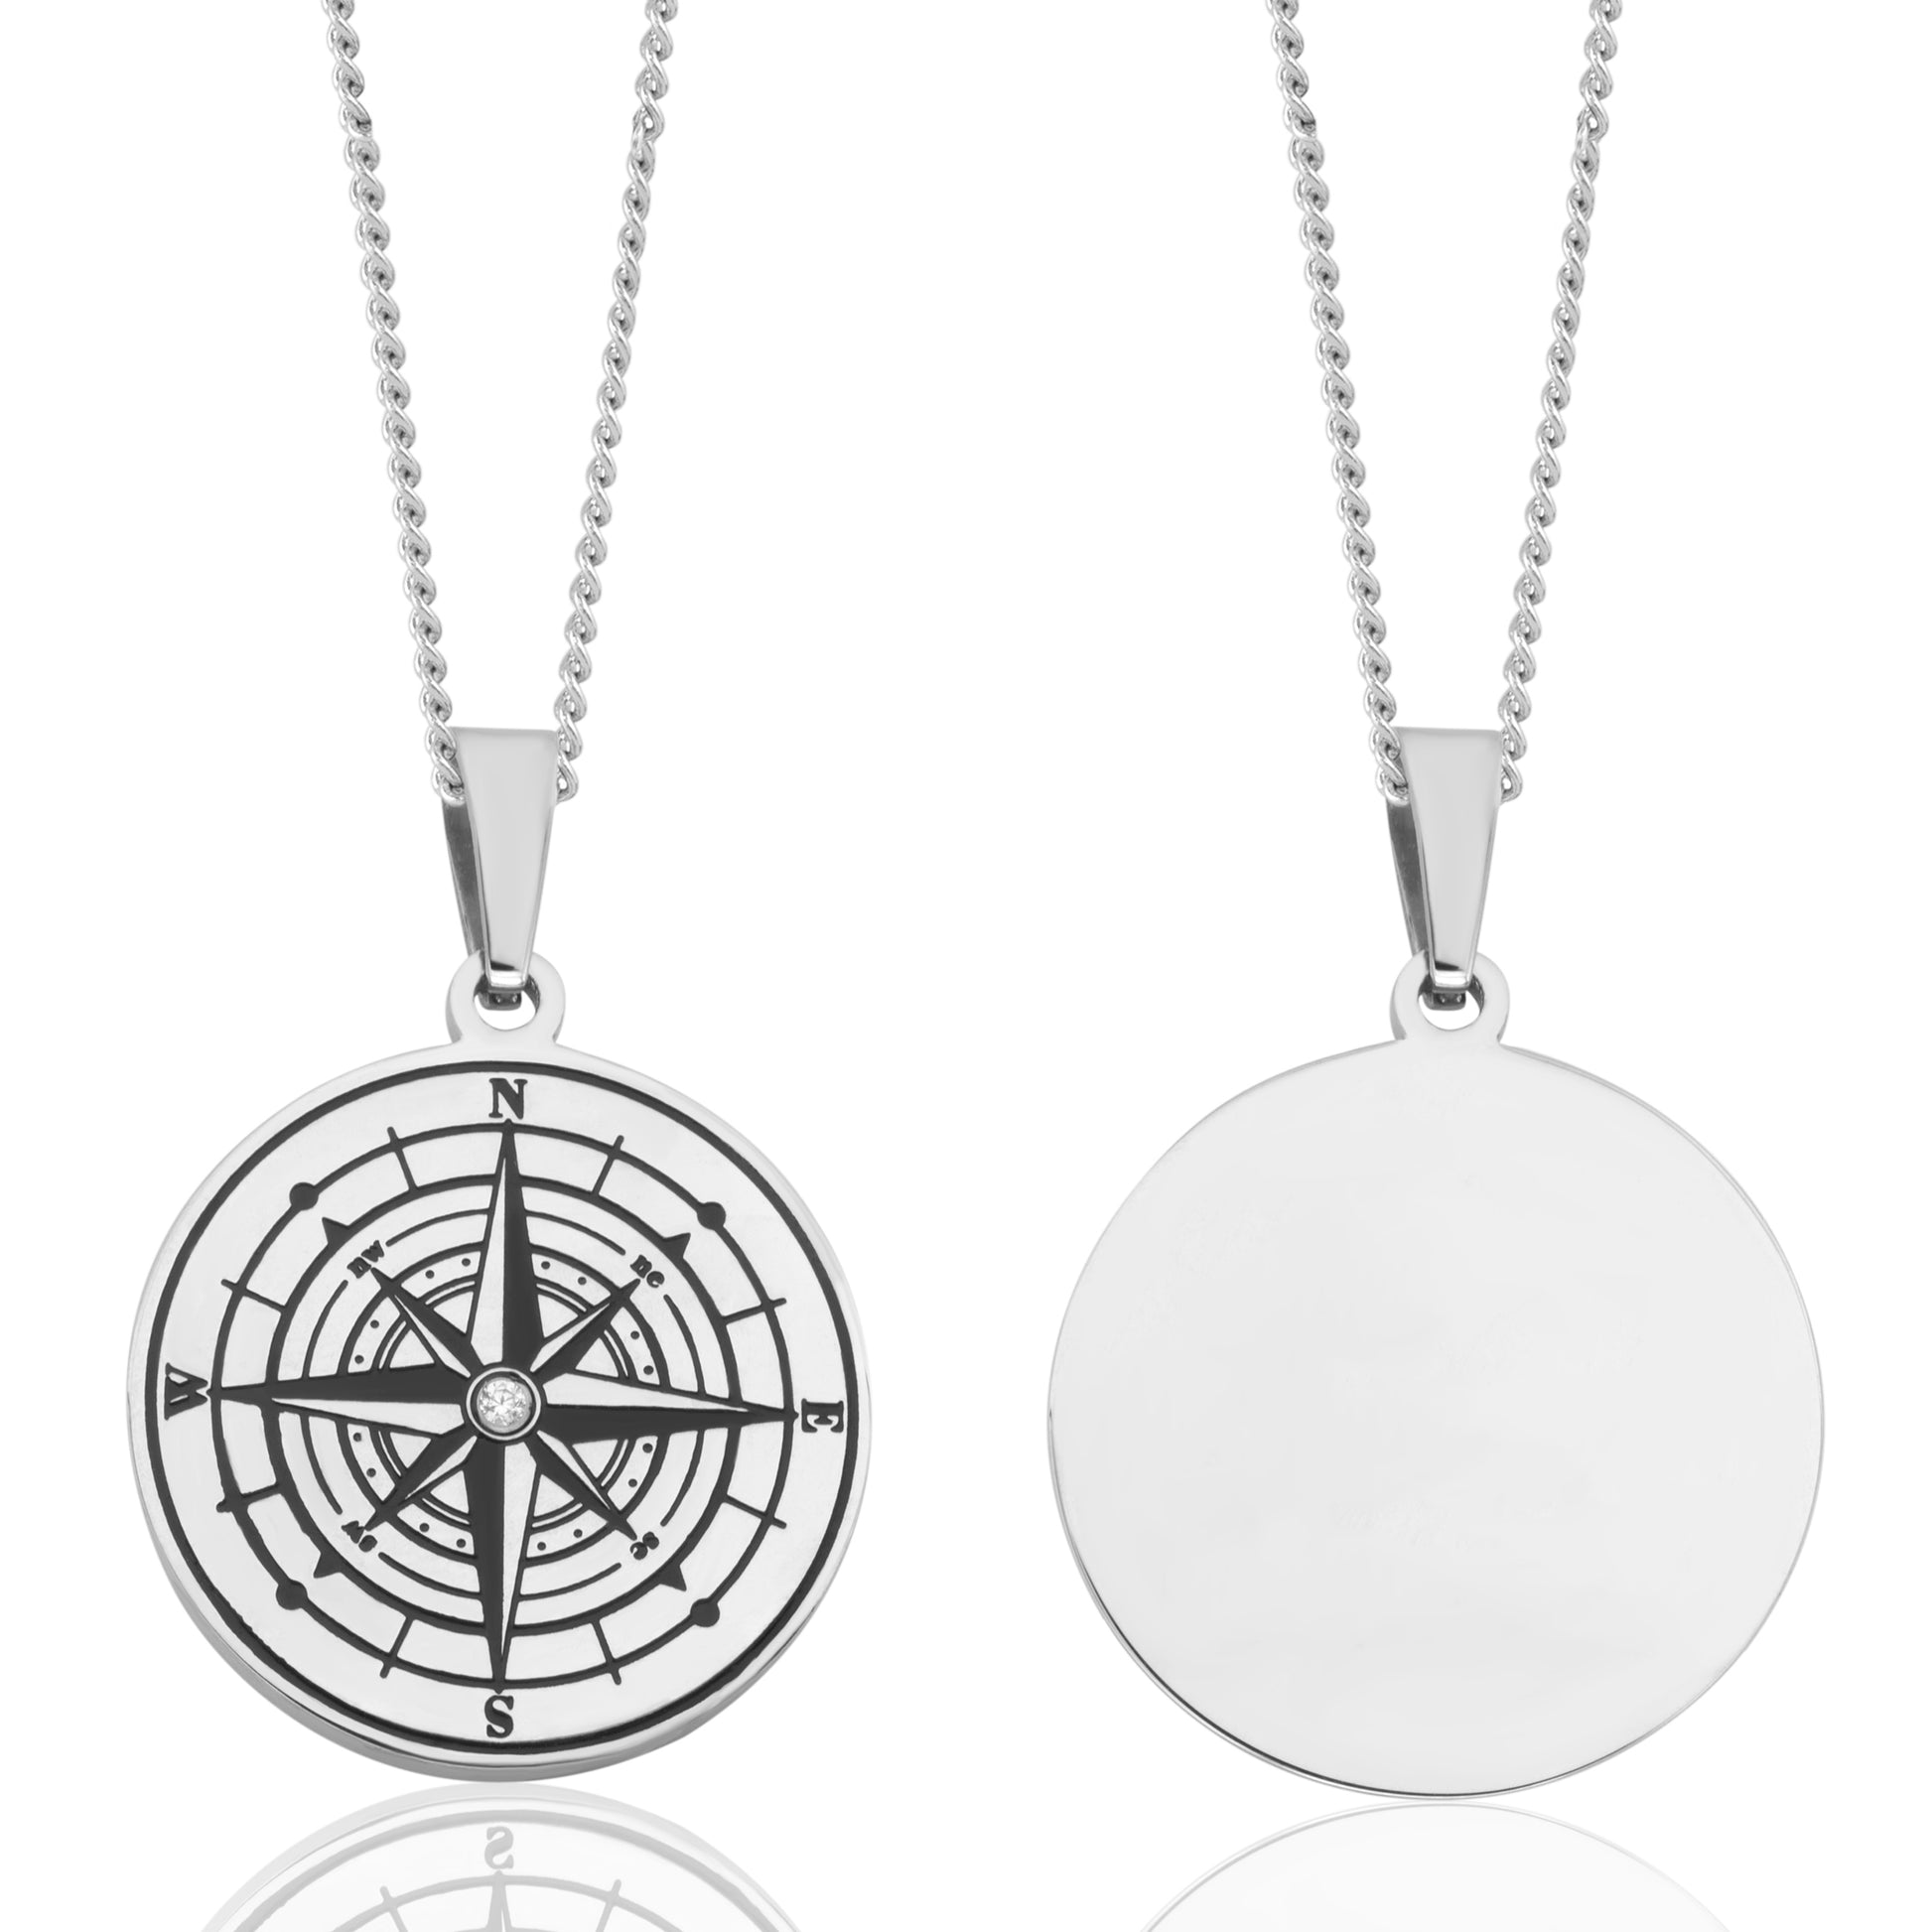 Nautical Compass CZ Pendant Necklace. Features a center Cubic Zirconia stone. This pendant comes with an 18 inches chain with a 3 inches extender and a Lobster Claw clasp. The pendant material is Stainless Steel with a 1.25 inches length. Add meaningful engraving